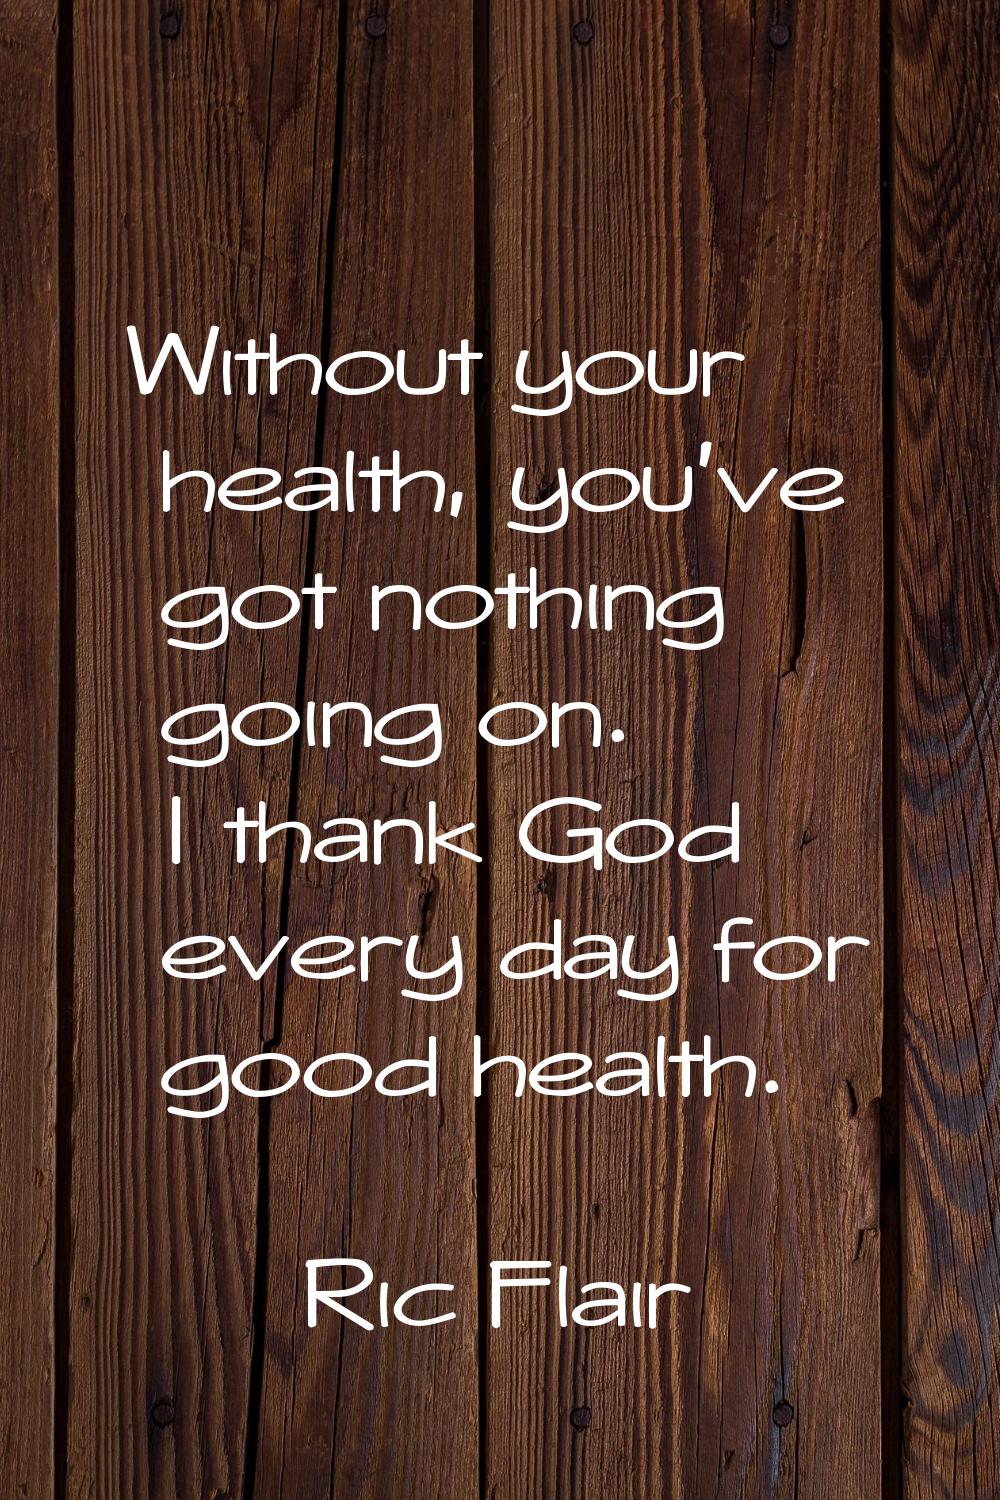 Without your health, you've got nothing going on. I thank God every day for good health.